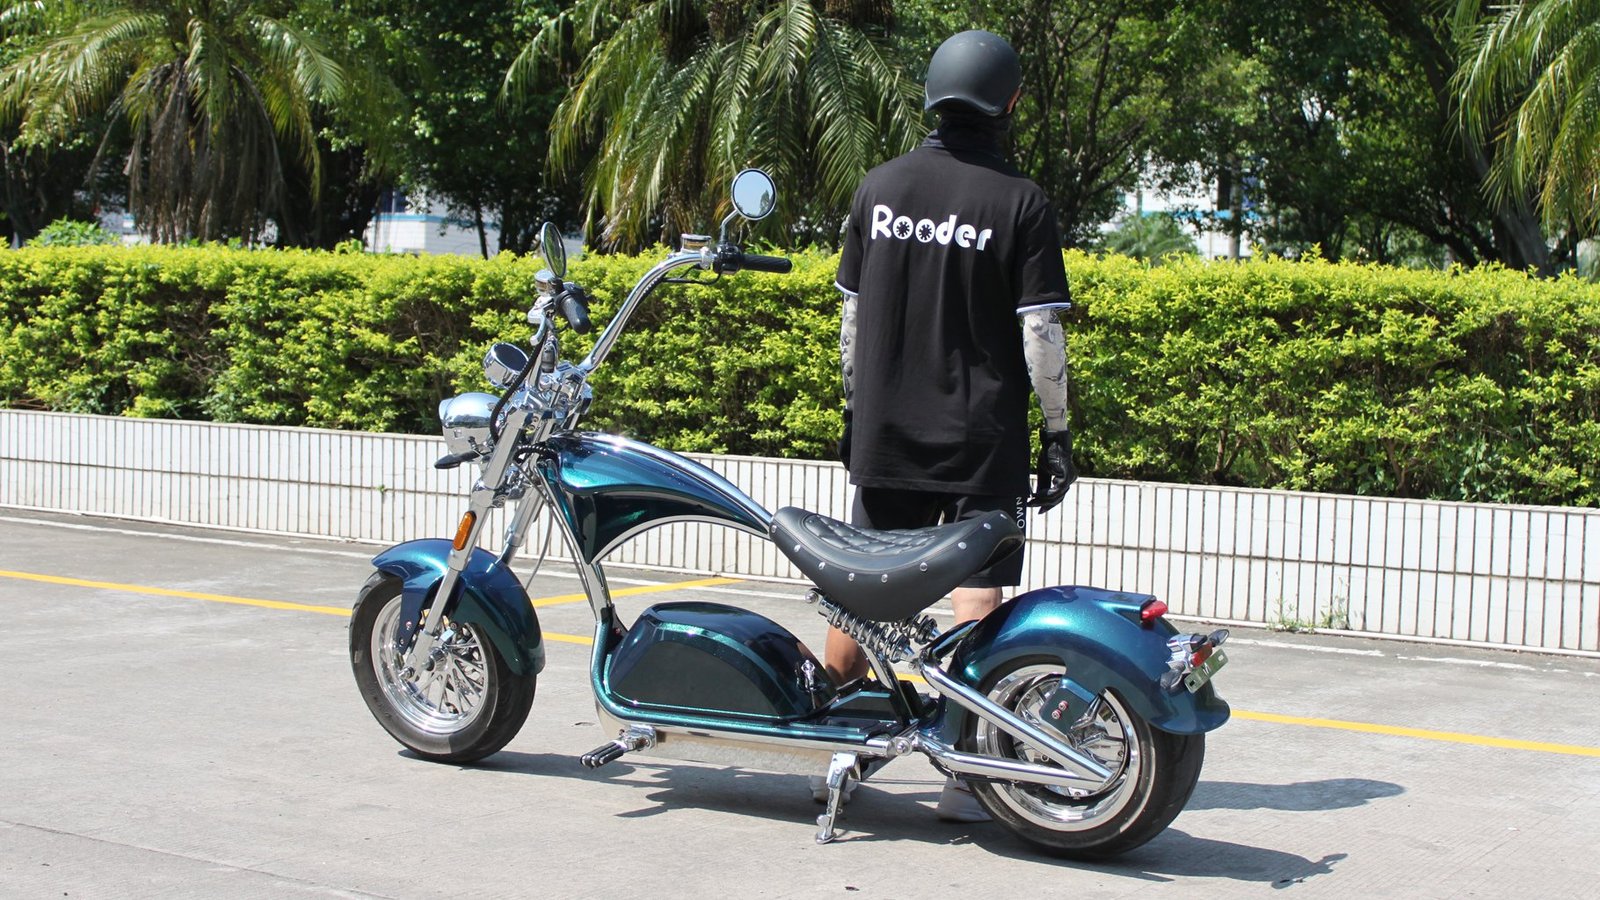 Rooder sara m1ps electric scooter bike citycoco chopper 72v 4000w diamond turquoise green  (10)